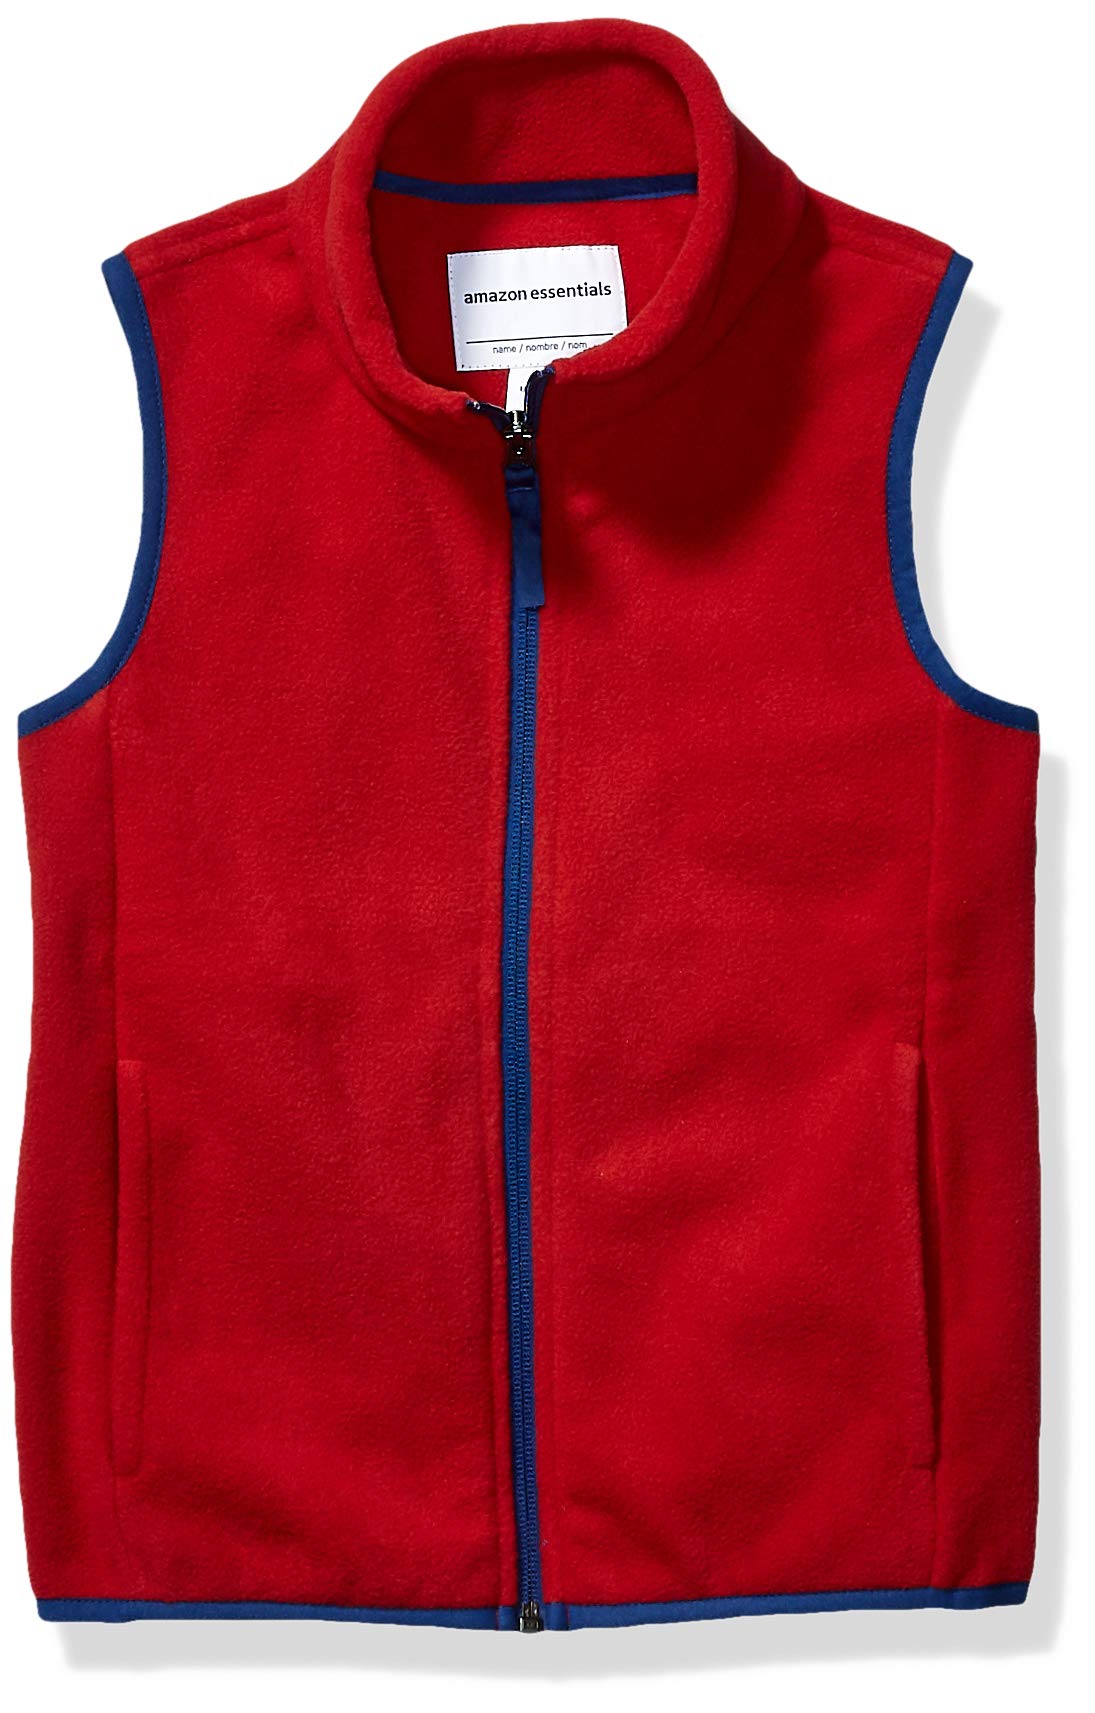 Amazon Essentials Boys and Toddlers' Polar Fleece Vest (Large, Red) $5.30 + Free Shipping w/ Prime or on orders $35+